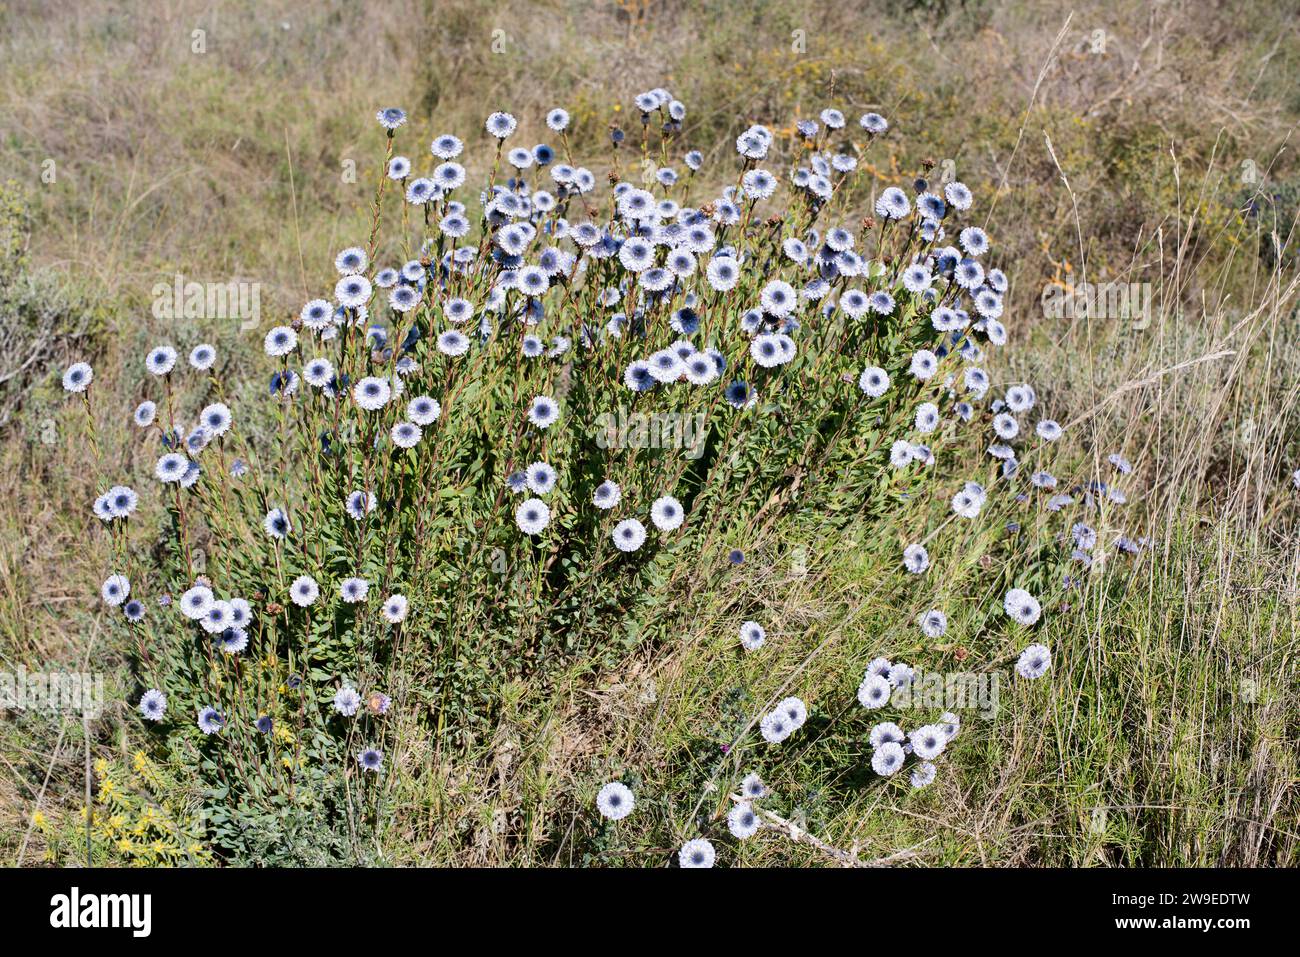 Crown friar (Globularia alypum) is a small shrub native to Mediterranean Basin. This toxic plant was used how a medicinal. This photo was taken in Utx Stock Photo